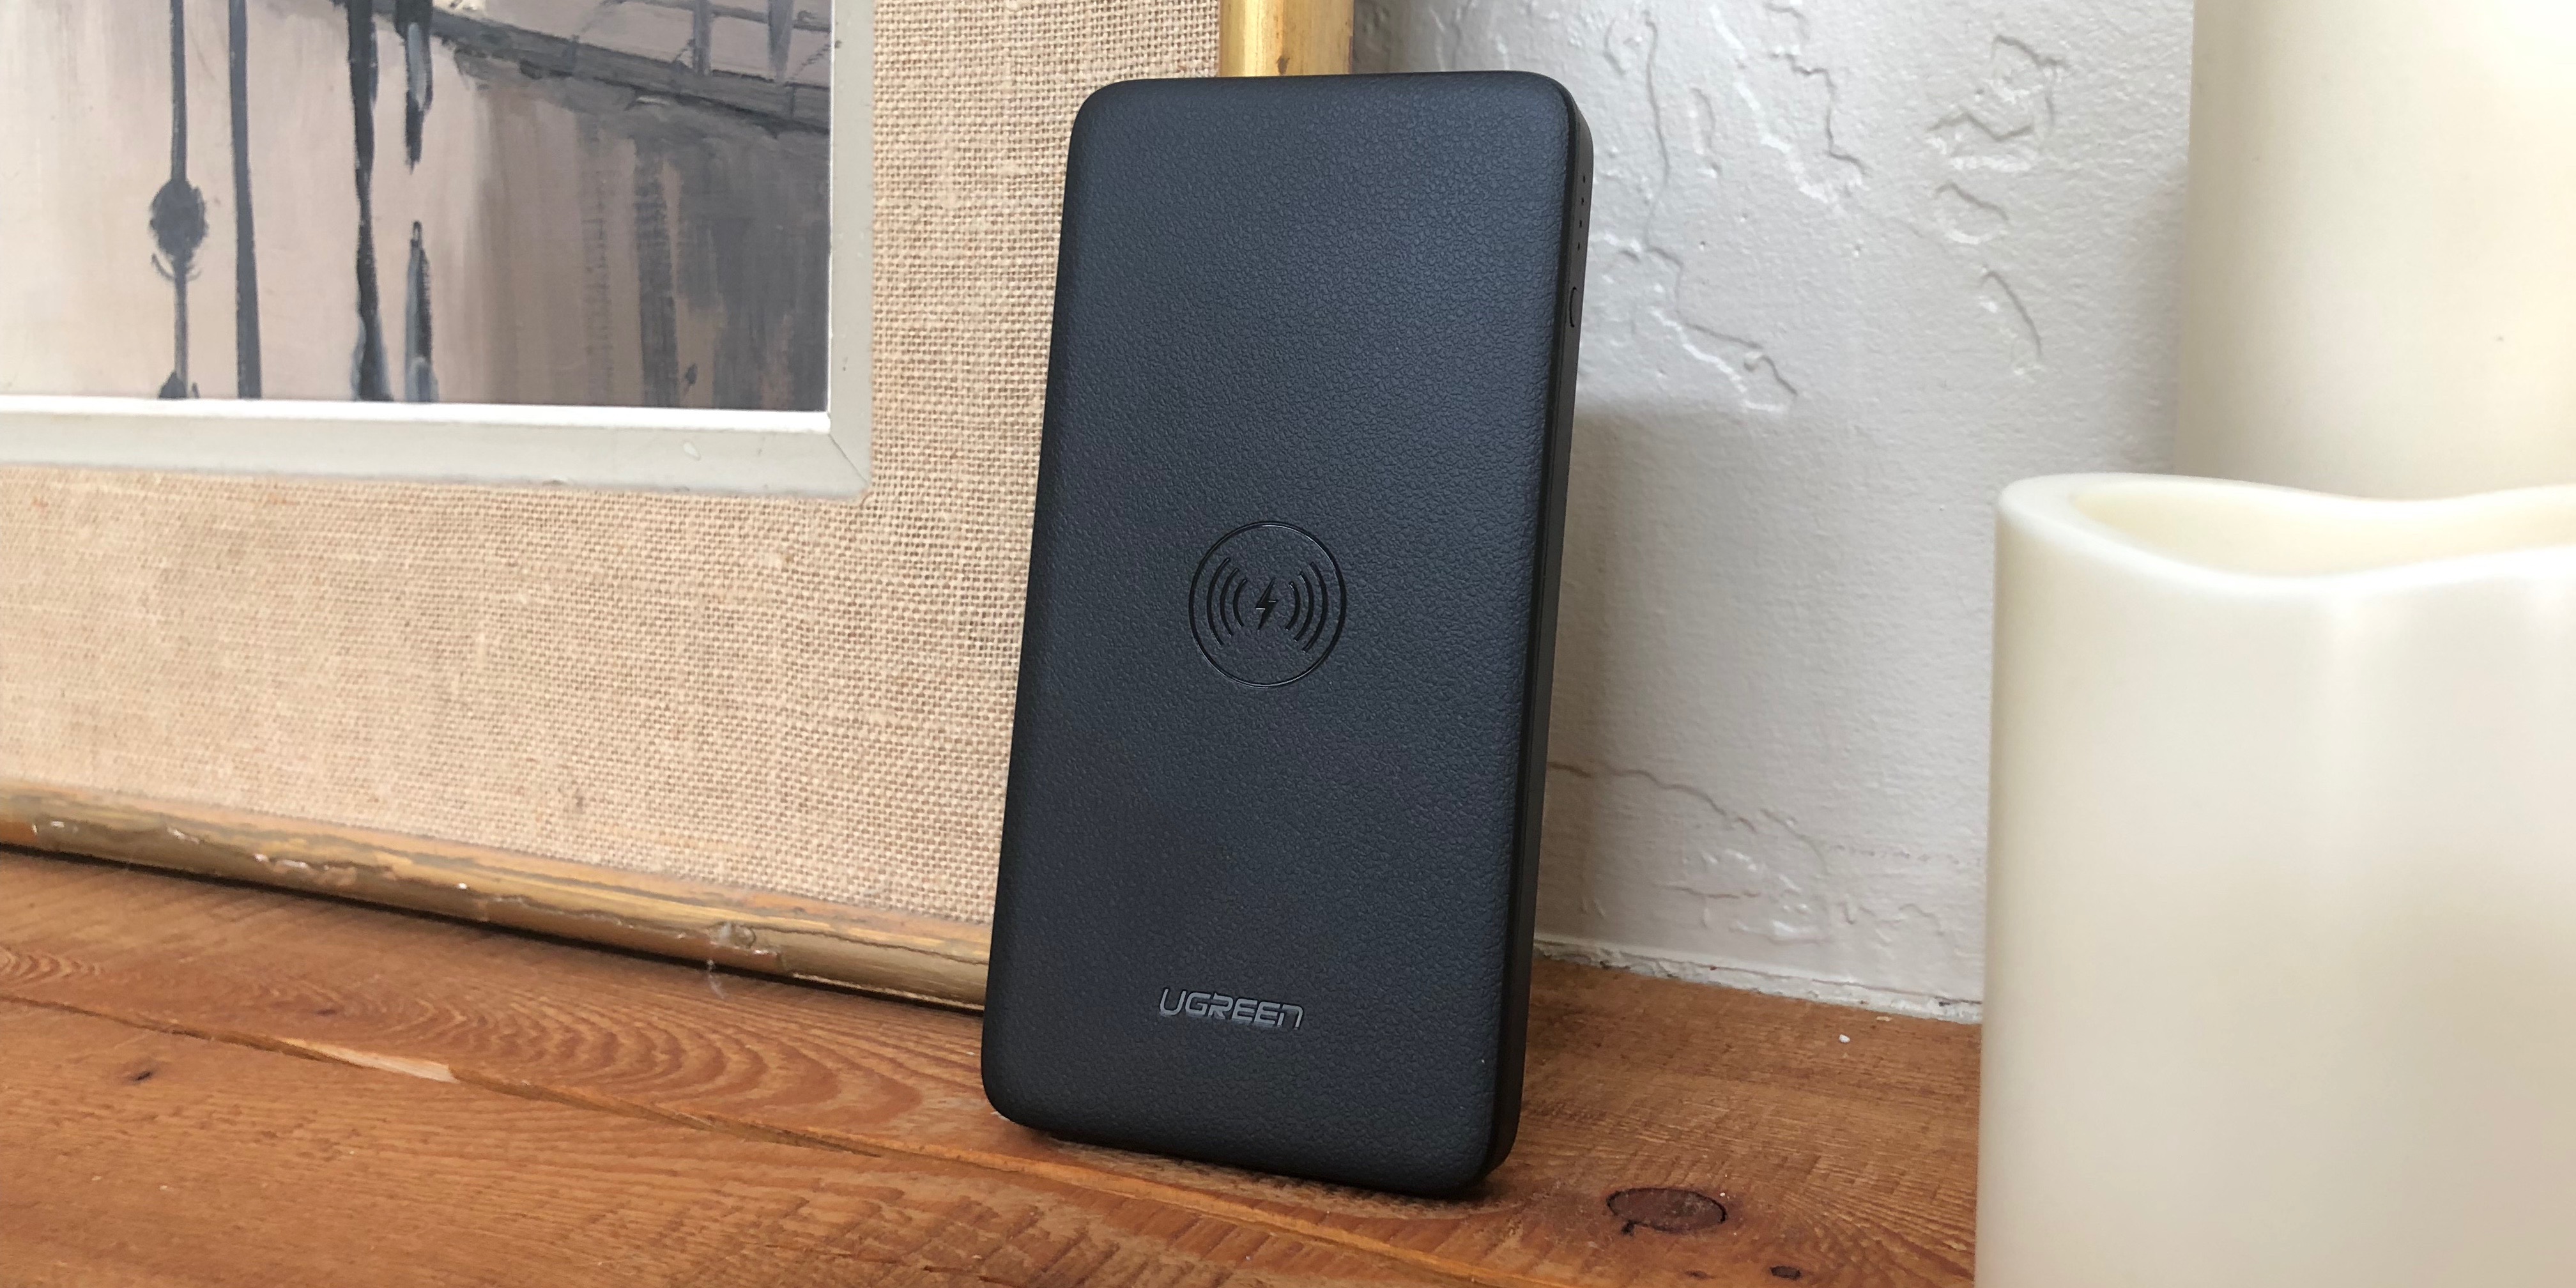 Ugreen's Power Bank with USB-C and wireless charging impresses